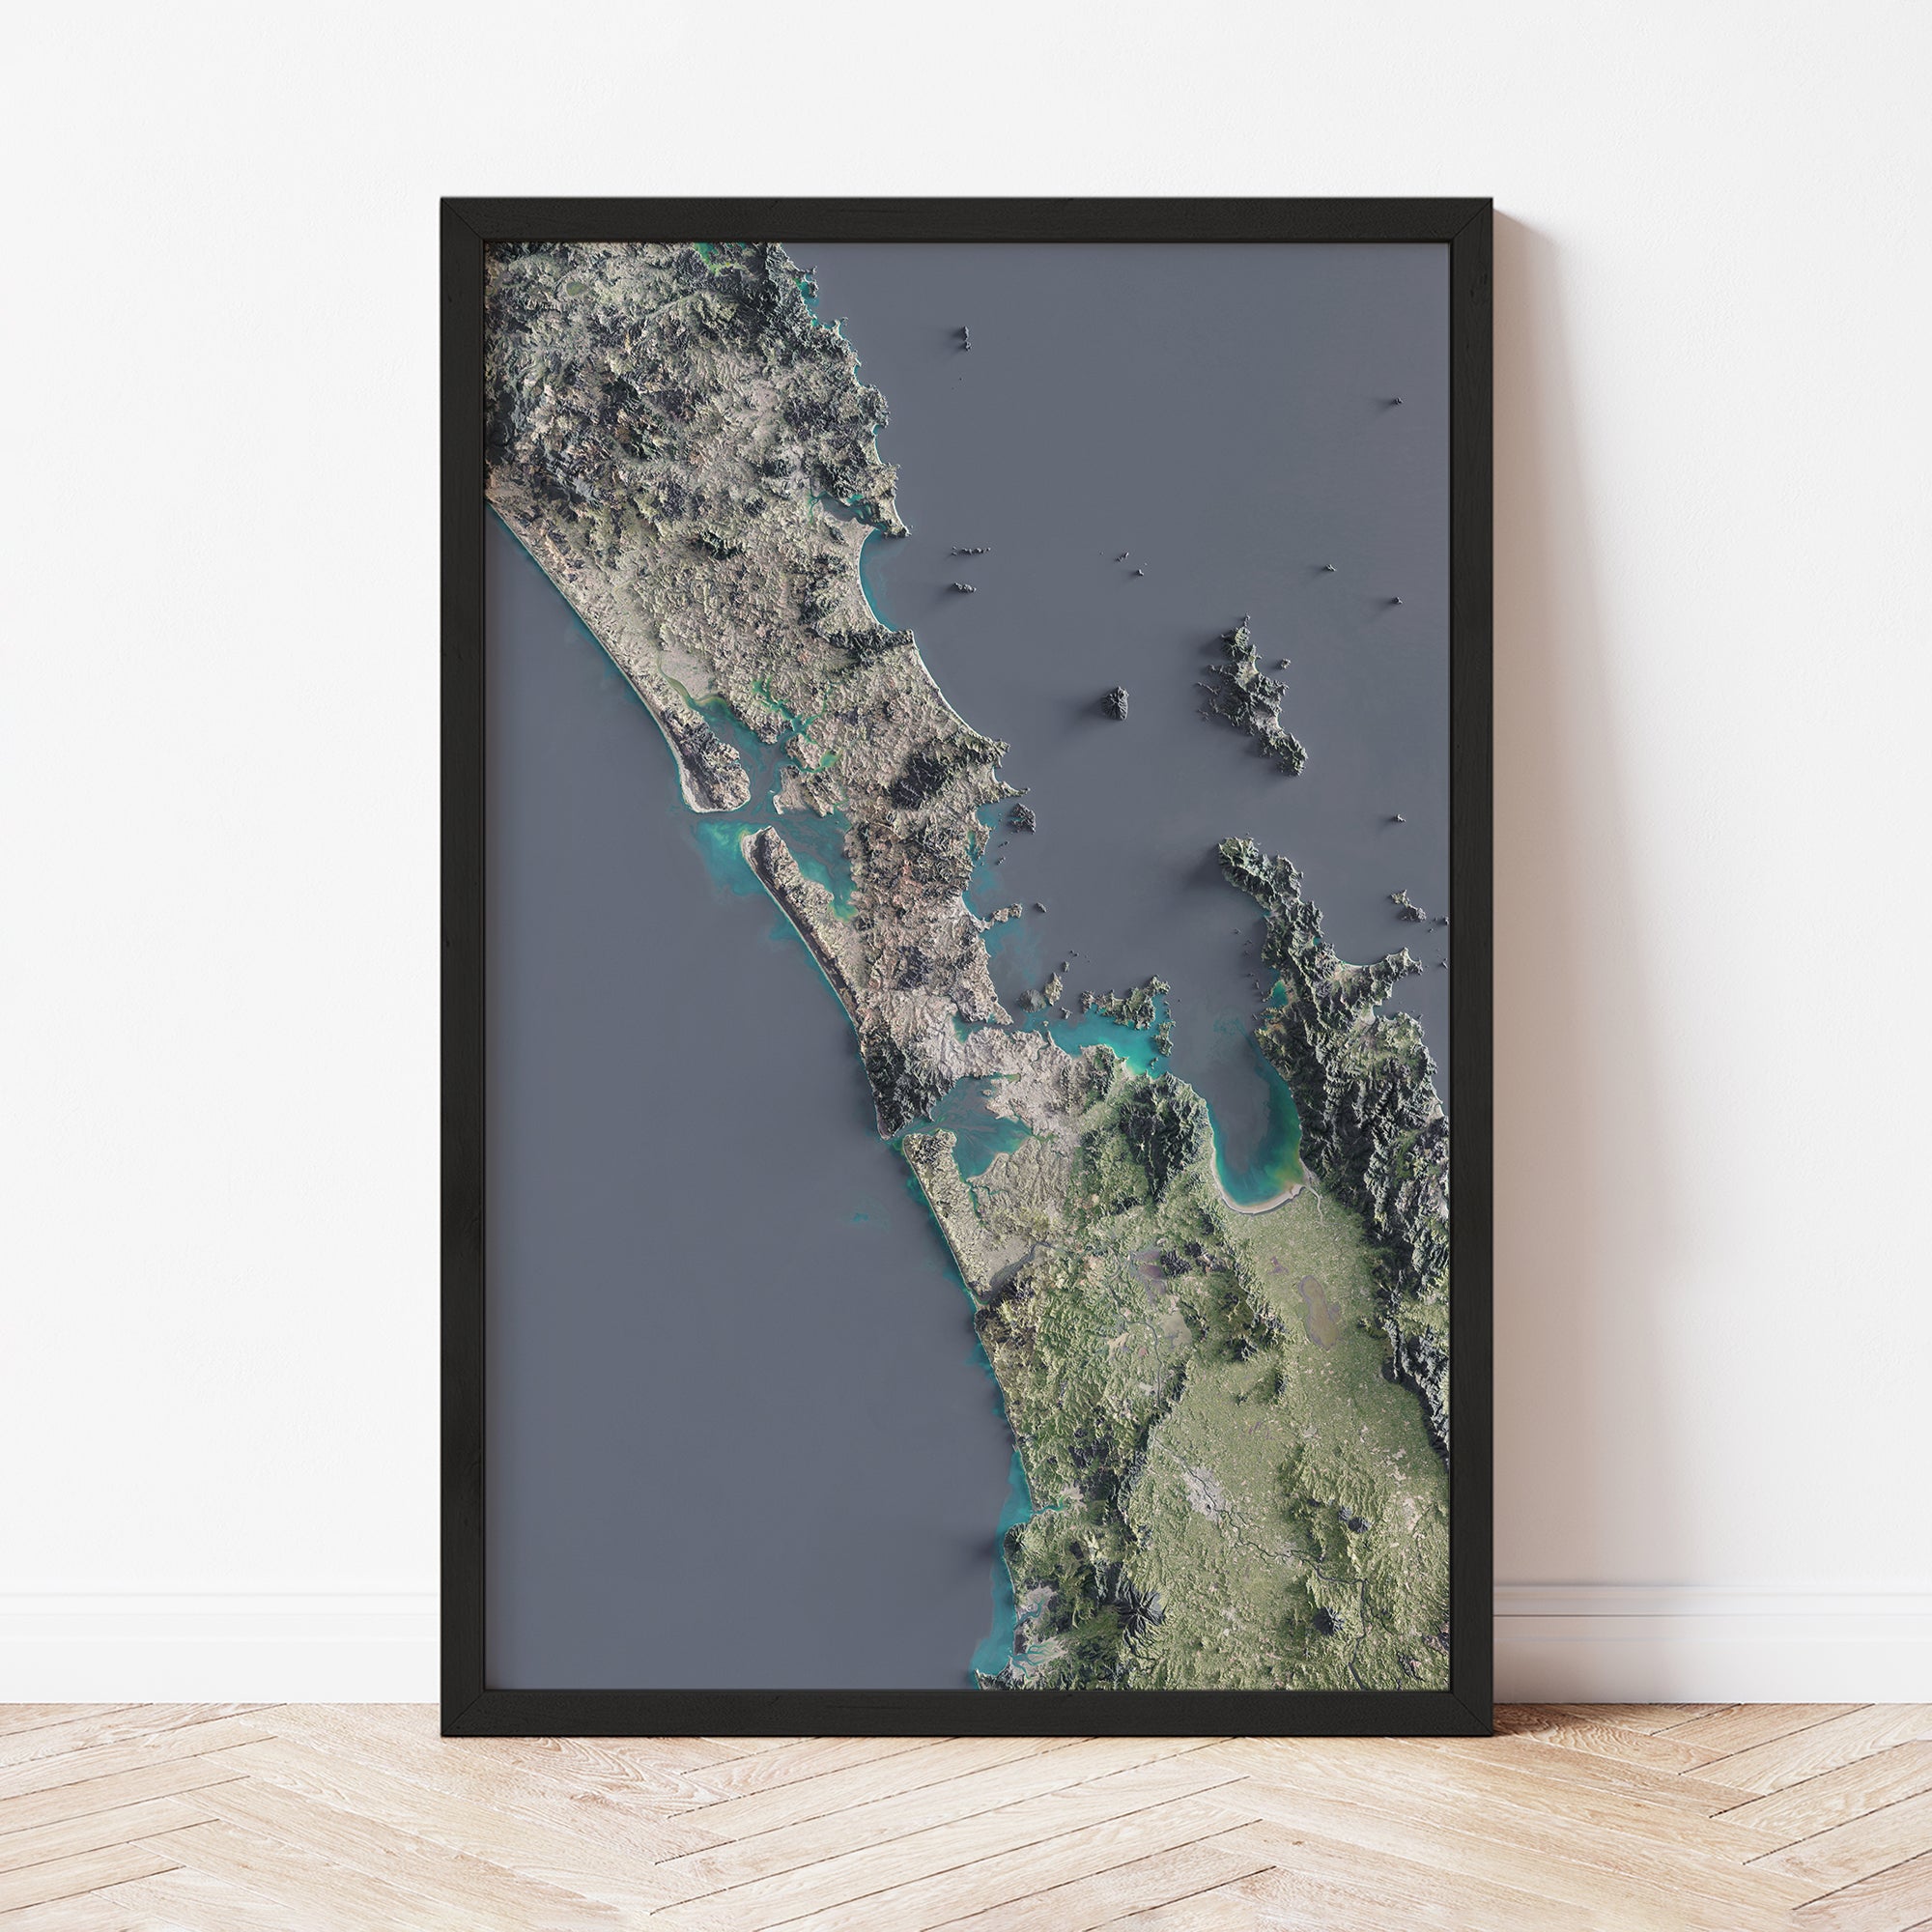 Auckland - Satellite Imagery